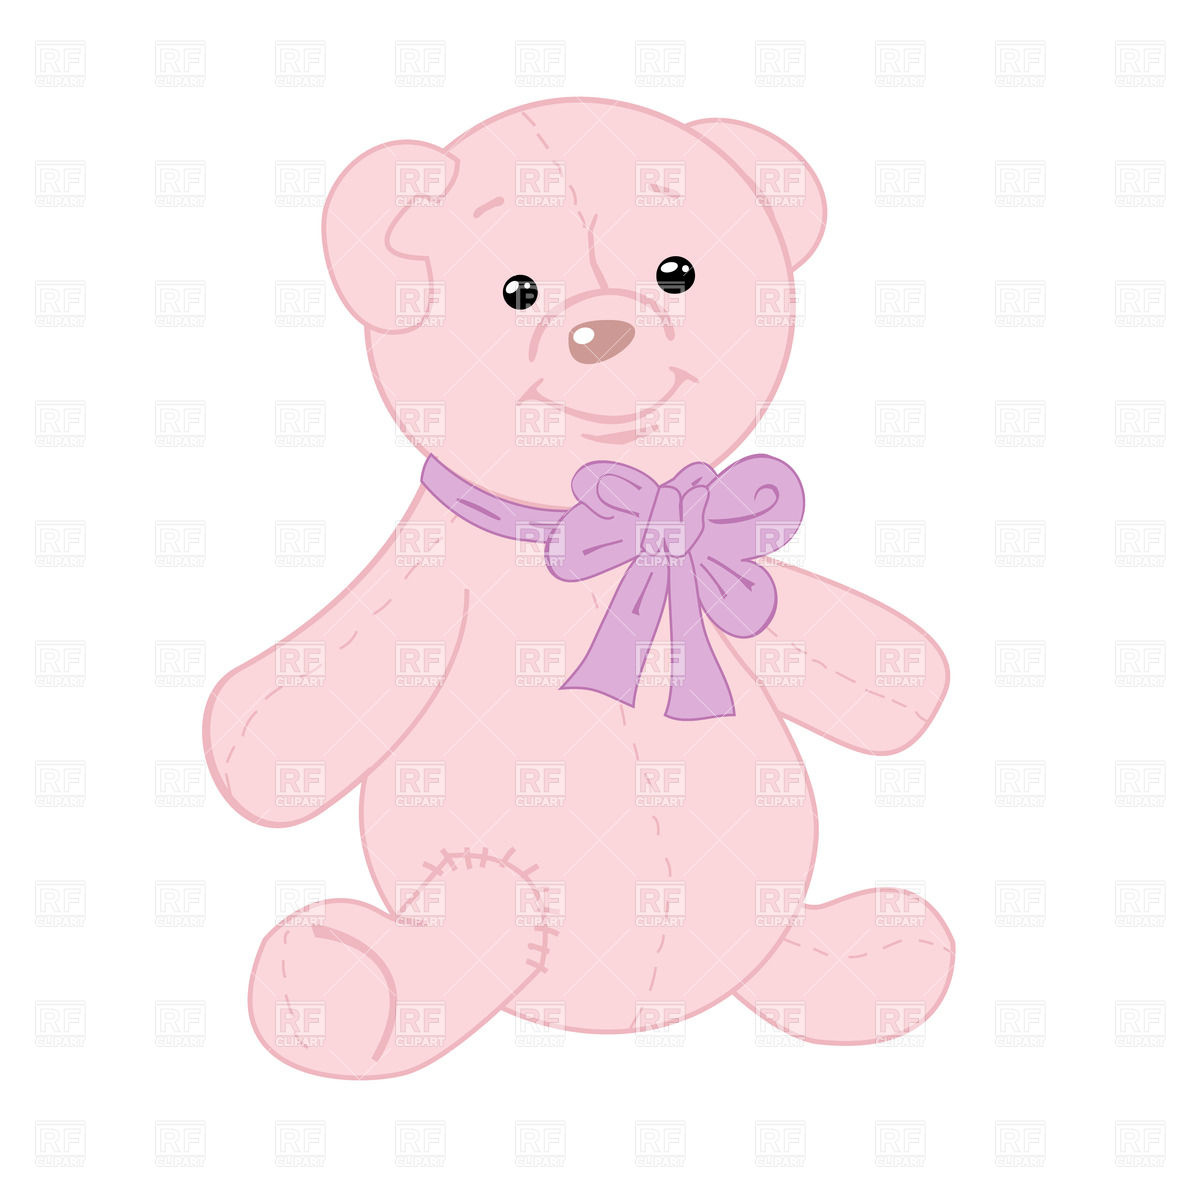 Pink Teddy Bear With Purple Bow Download Royalty Free Vector Clipart